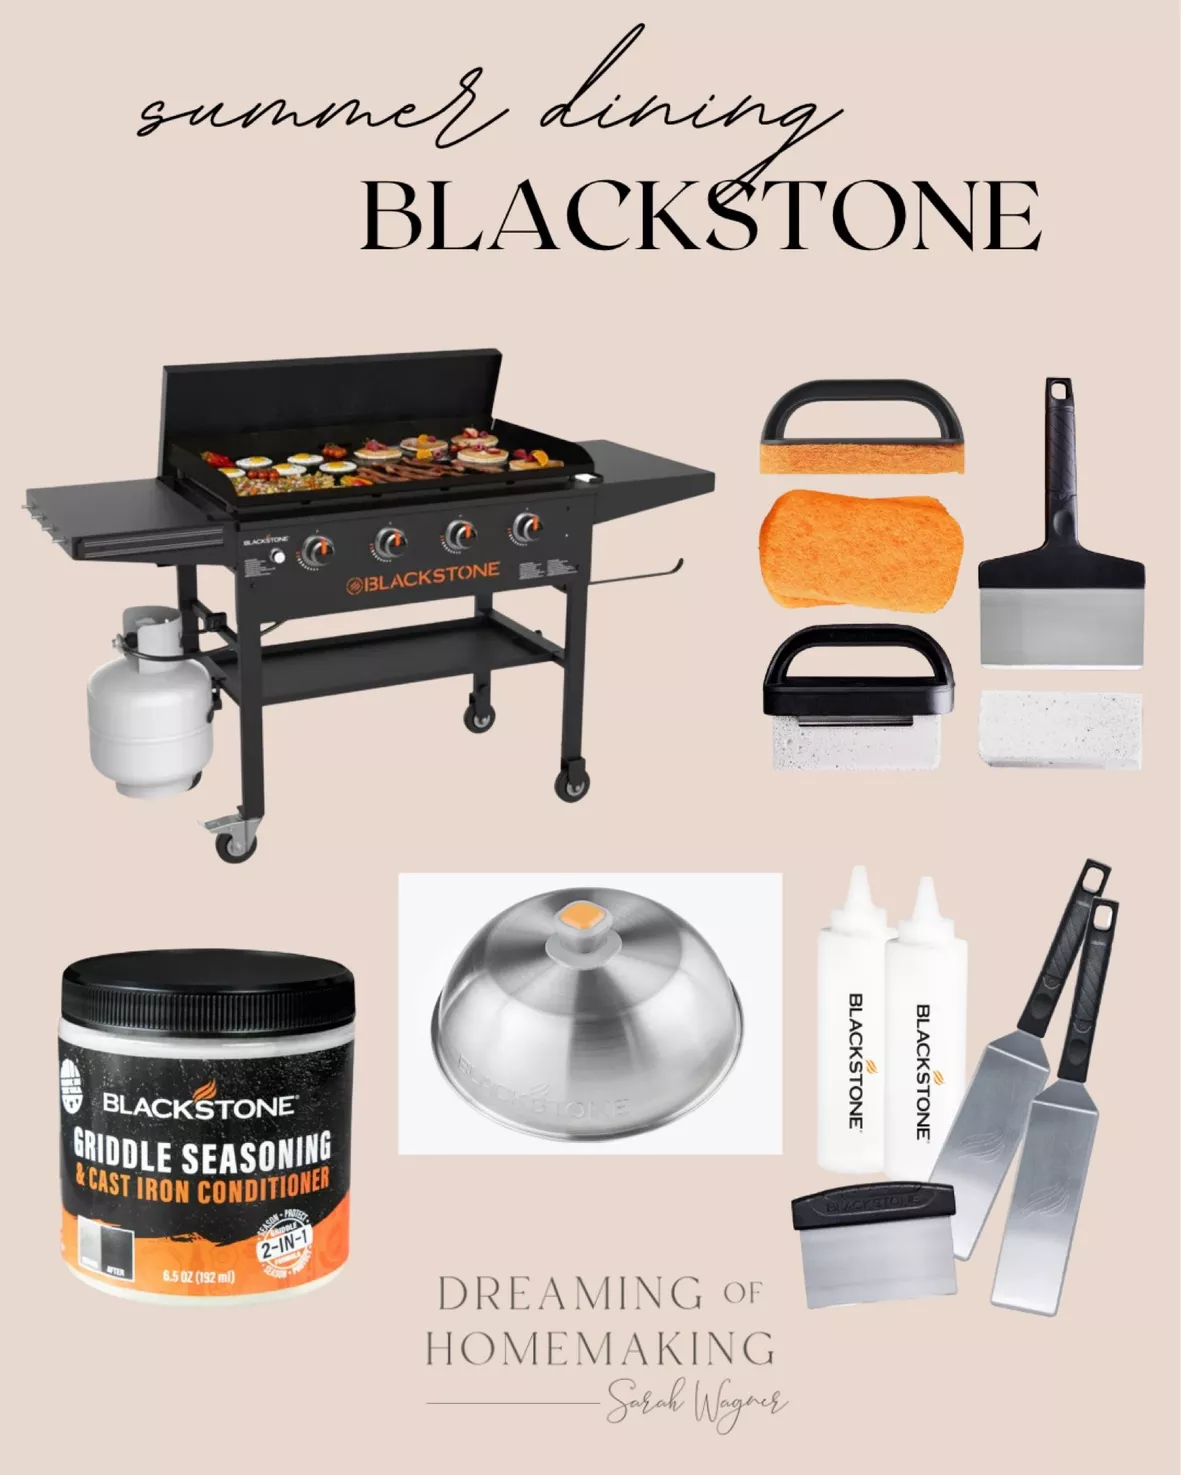 Blackstone Griddle Seasoning And Cast Iron Conditioner 6.5oz : Target